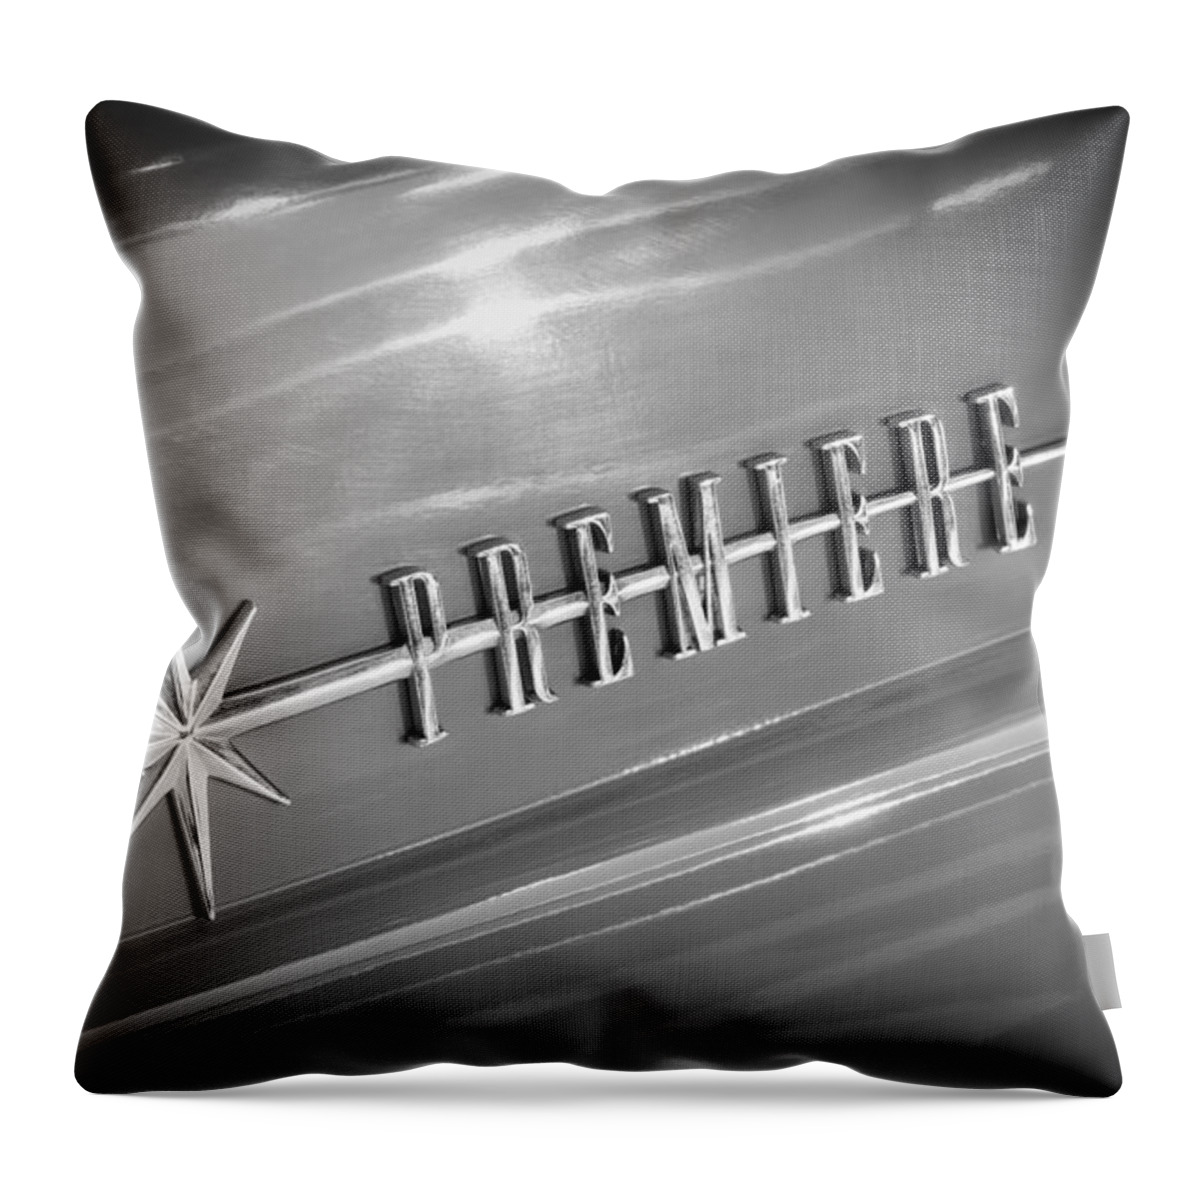 1956 Lincoln Premiere Emblem Throw Pillow featuring the photograph 1956 Lincoln Premiere Emblem by Jill Reger